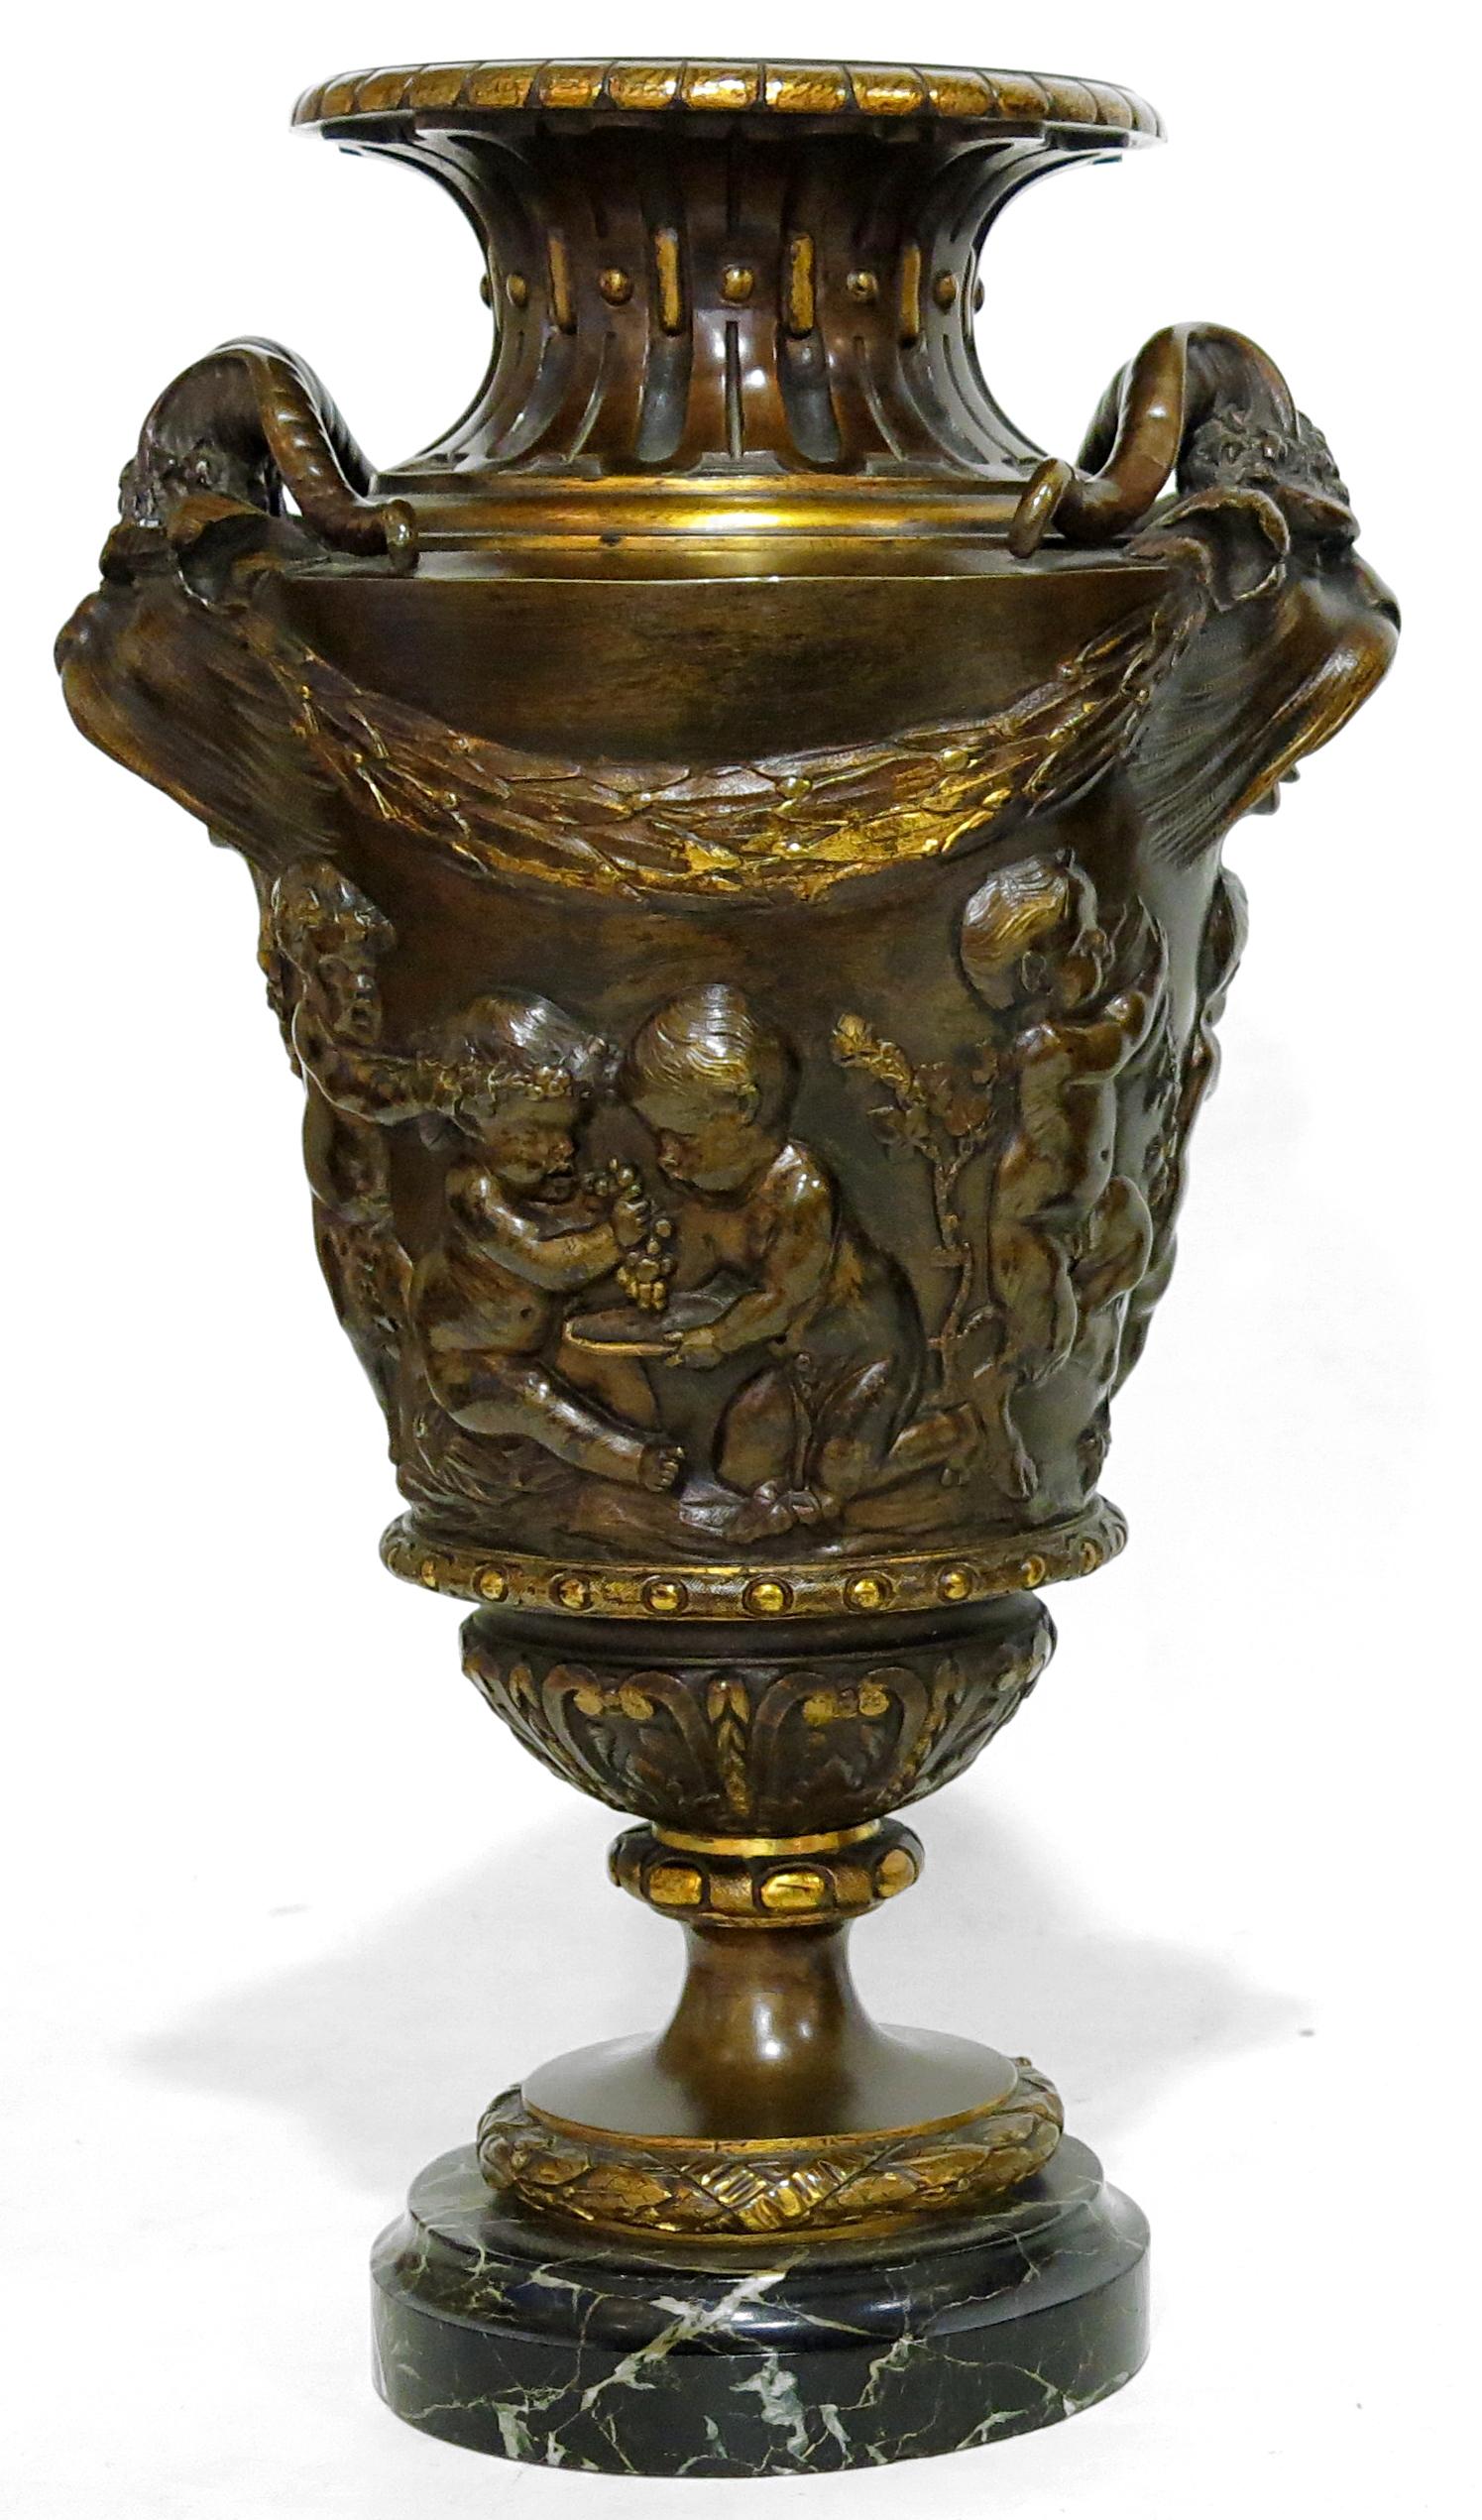 Fine pair of bronze vases, well chiselled, with a gilt and brown patina in the Louis XVI style. Ovoid shape, with circular decoration of a freize with Cherubs, pampres, and leafy flowered branches. Wide-mouthed flute neck, handles represented as